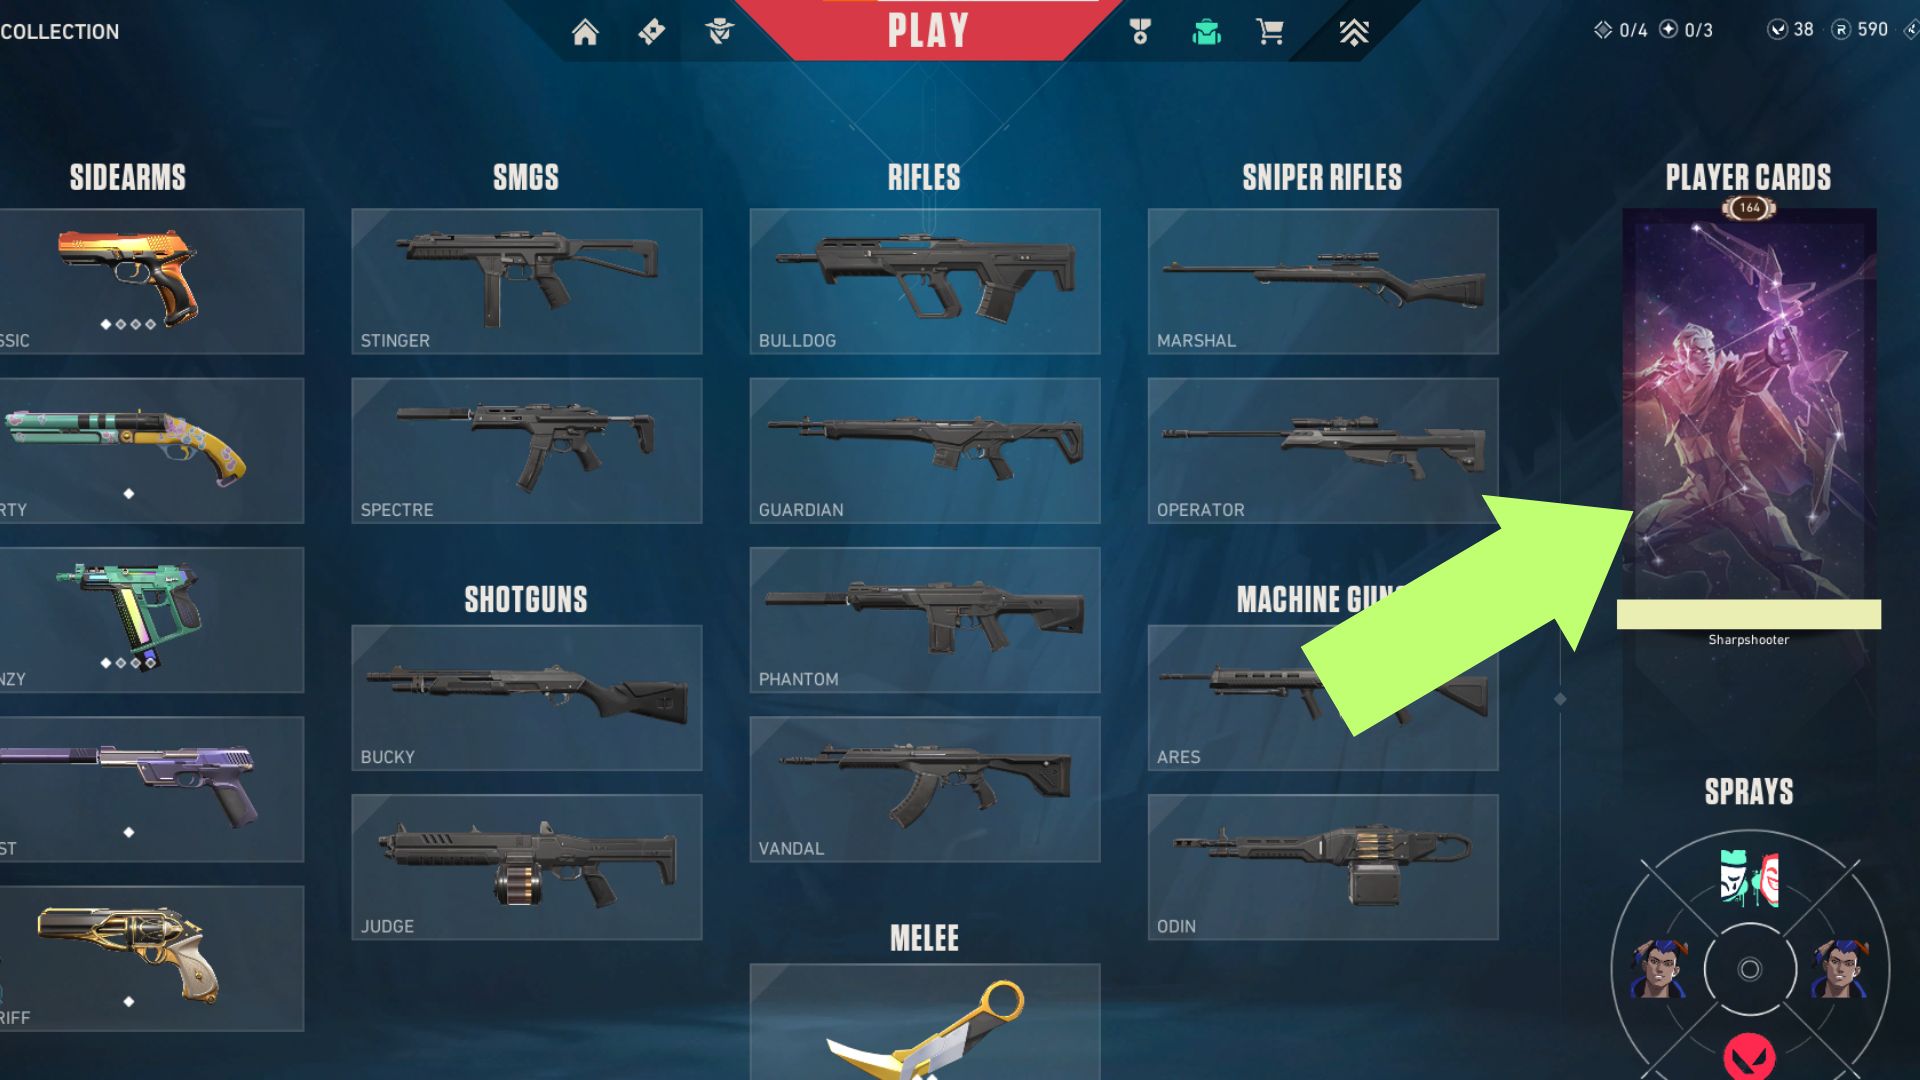 A screenshot of the player's collection tab, and an arrow pointing to the Player Cards section